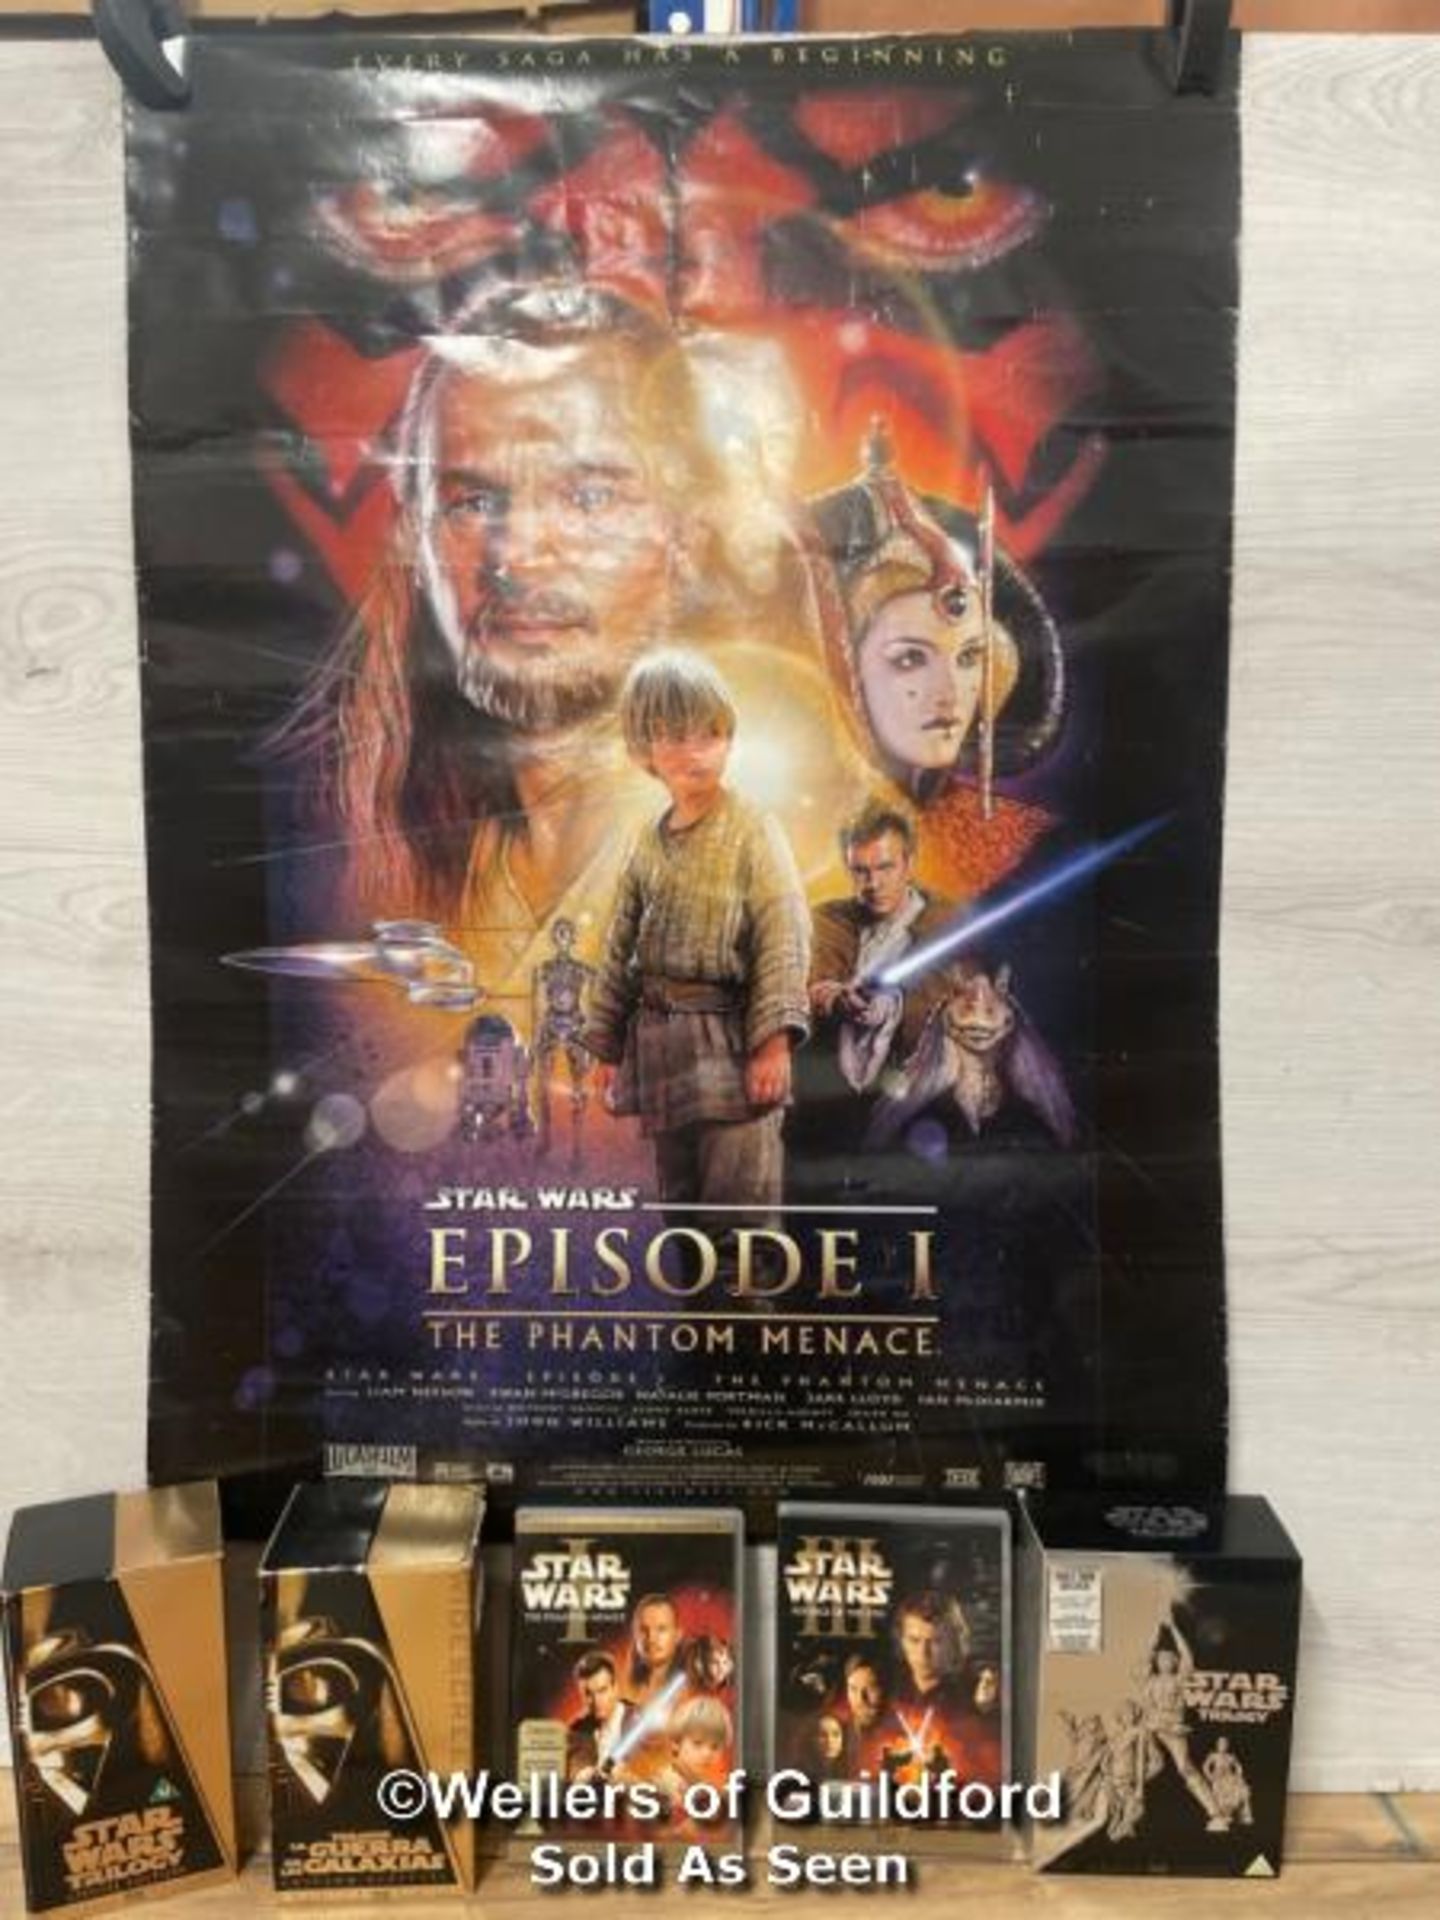 Star Wars DVD's and VHS includiing 1997 Special Edition French edition VHS, original trilogy DVD box